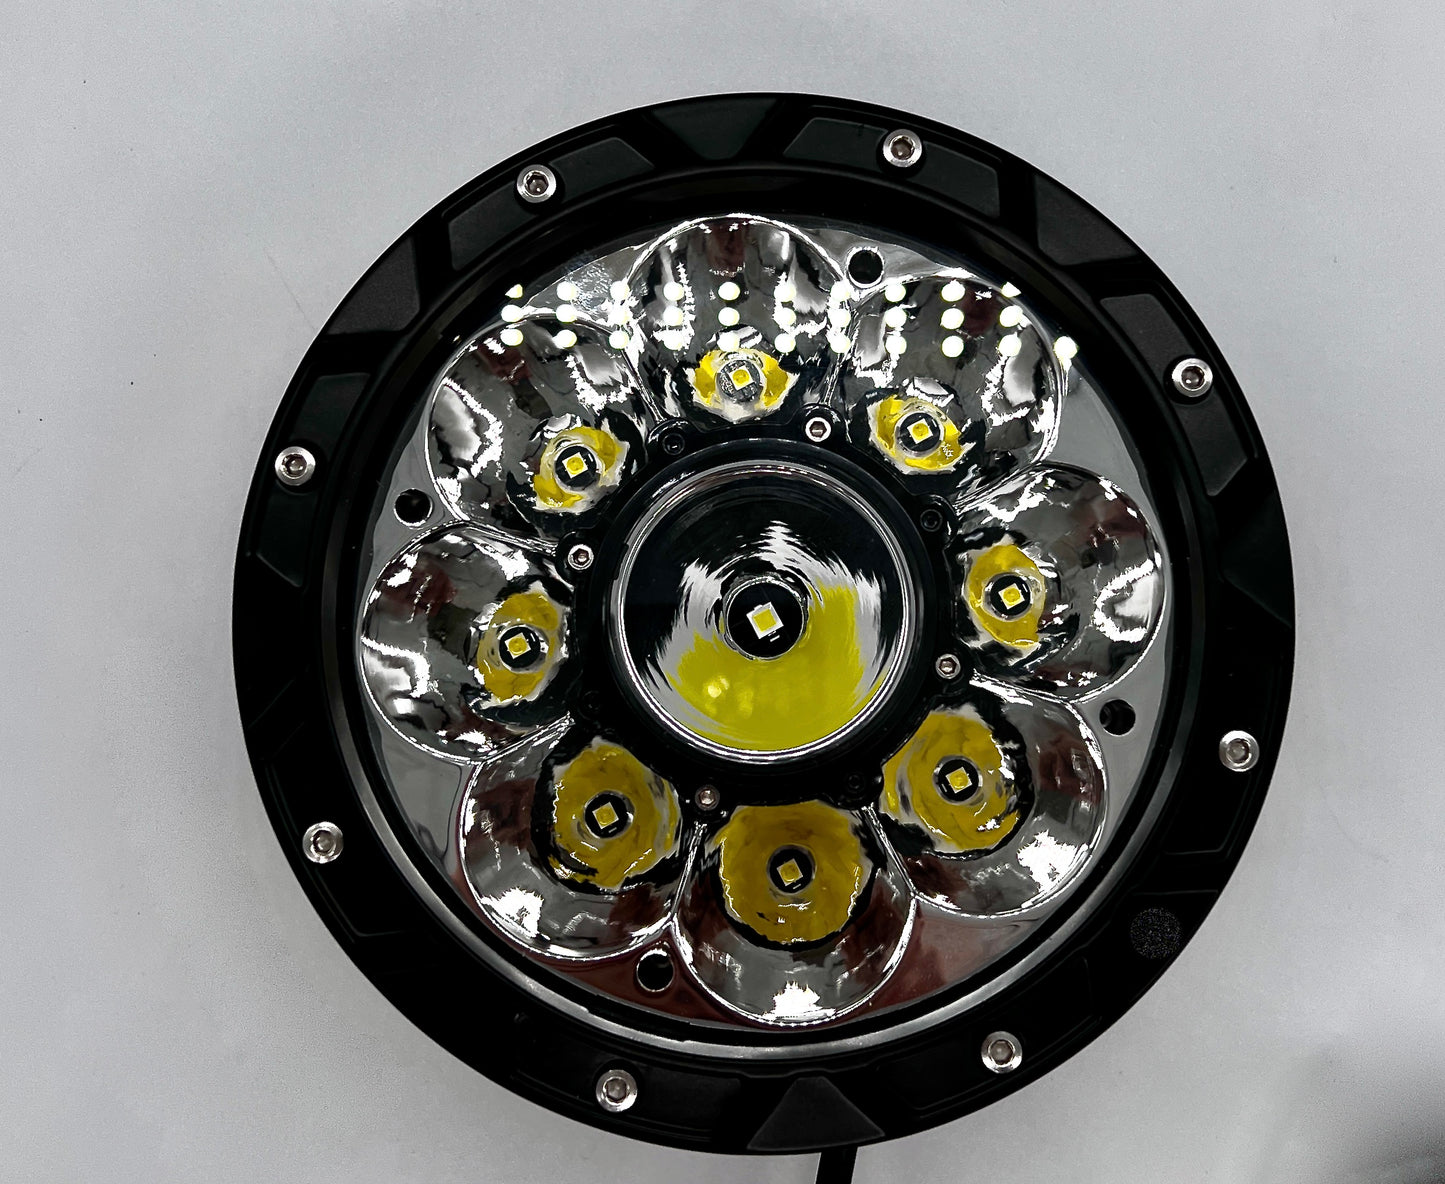 Code 4 LED 7″ 60 Watt round clear laser/spot light, sold in pairs